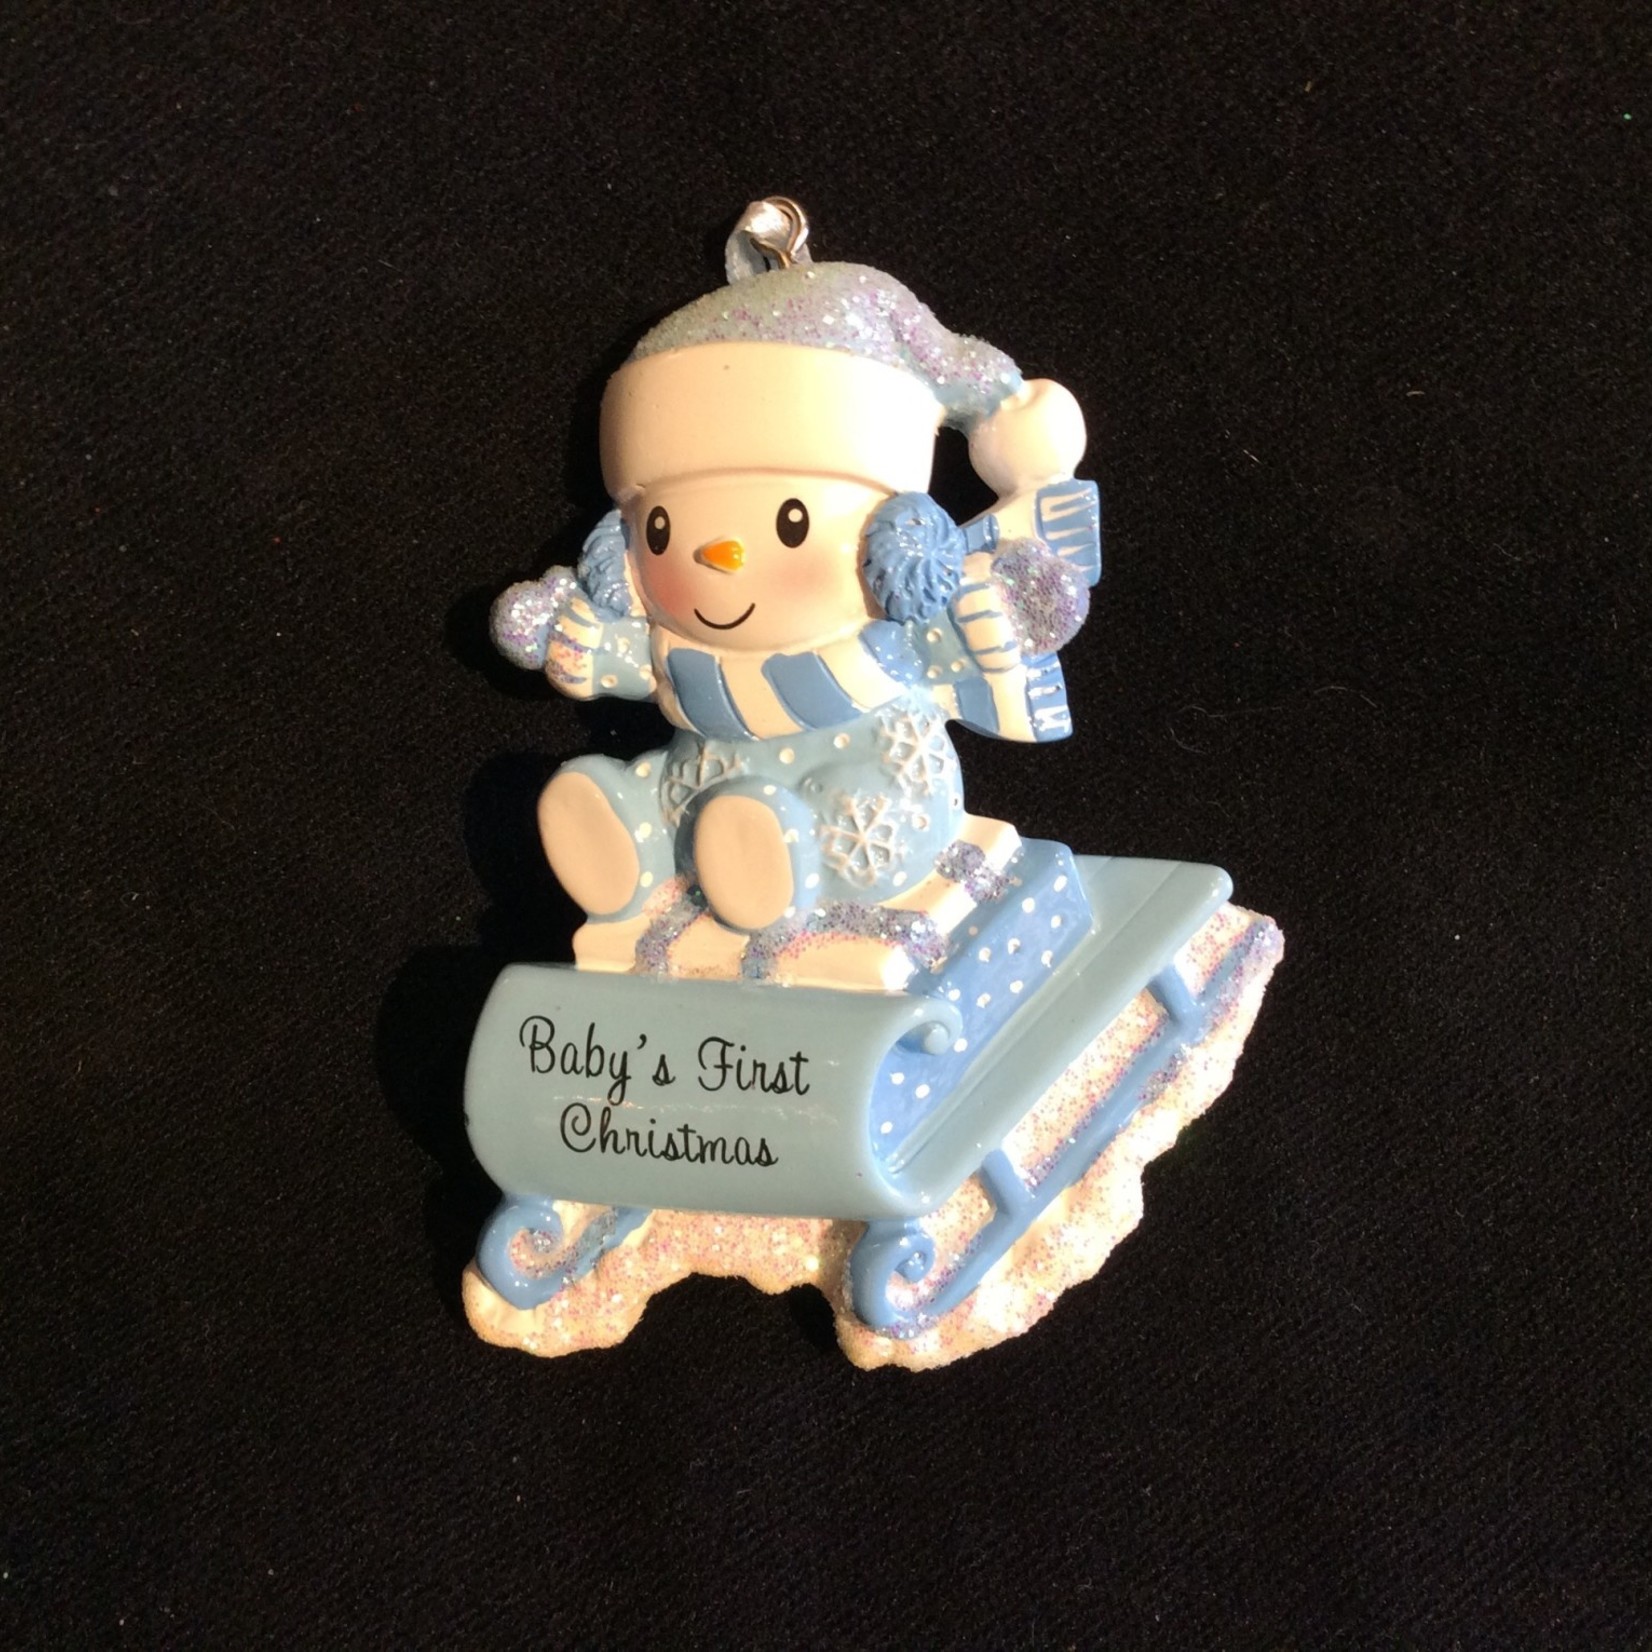 Snowbaby on Sled Orn - Blue